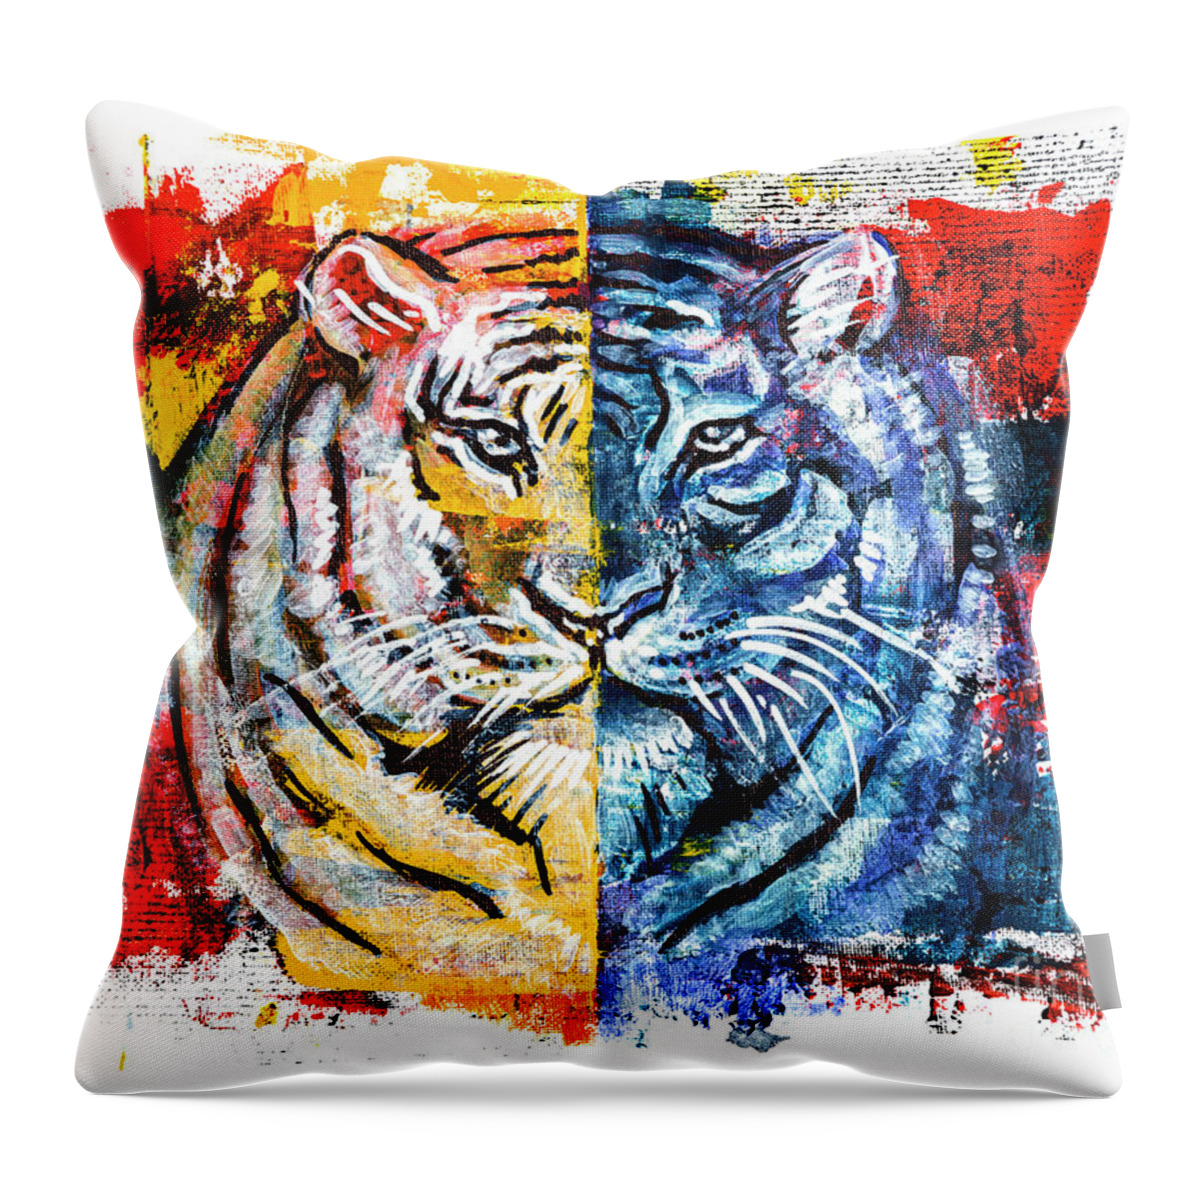 Tiger Throw Pillow featuring the painting Tiger, Original Acrylic Painting by Ariadna De Raadt